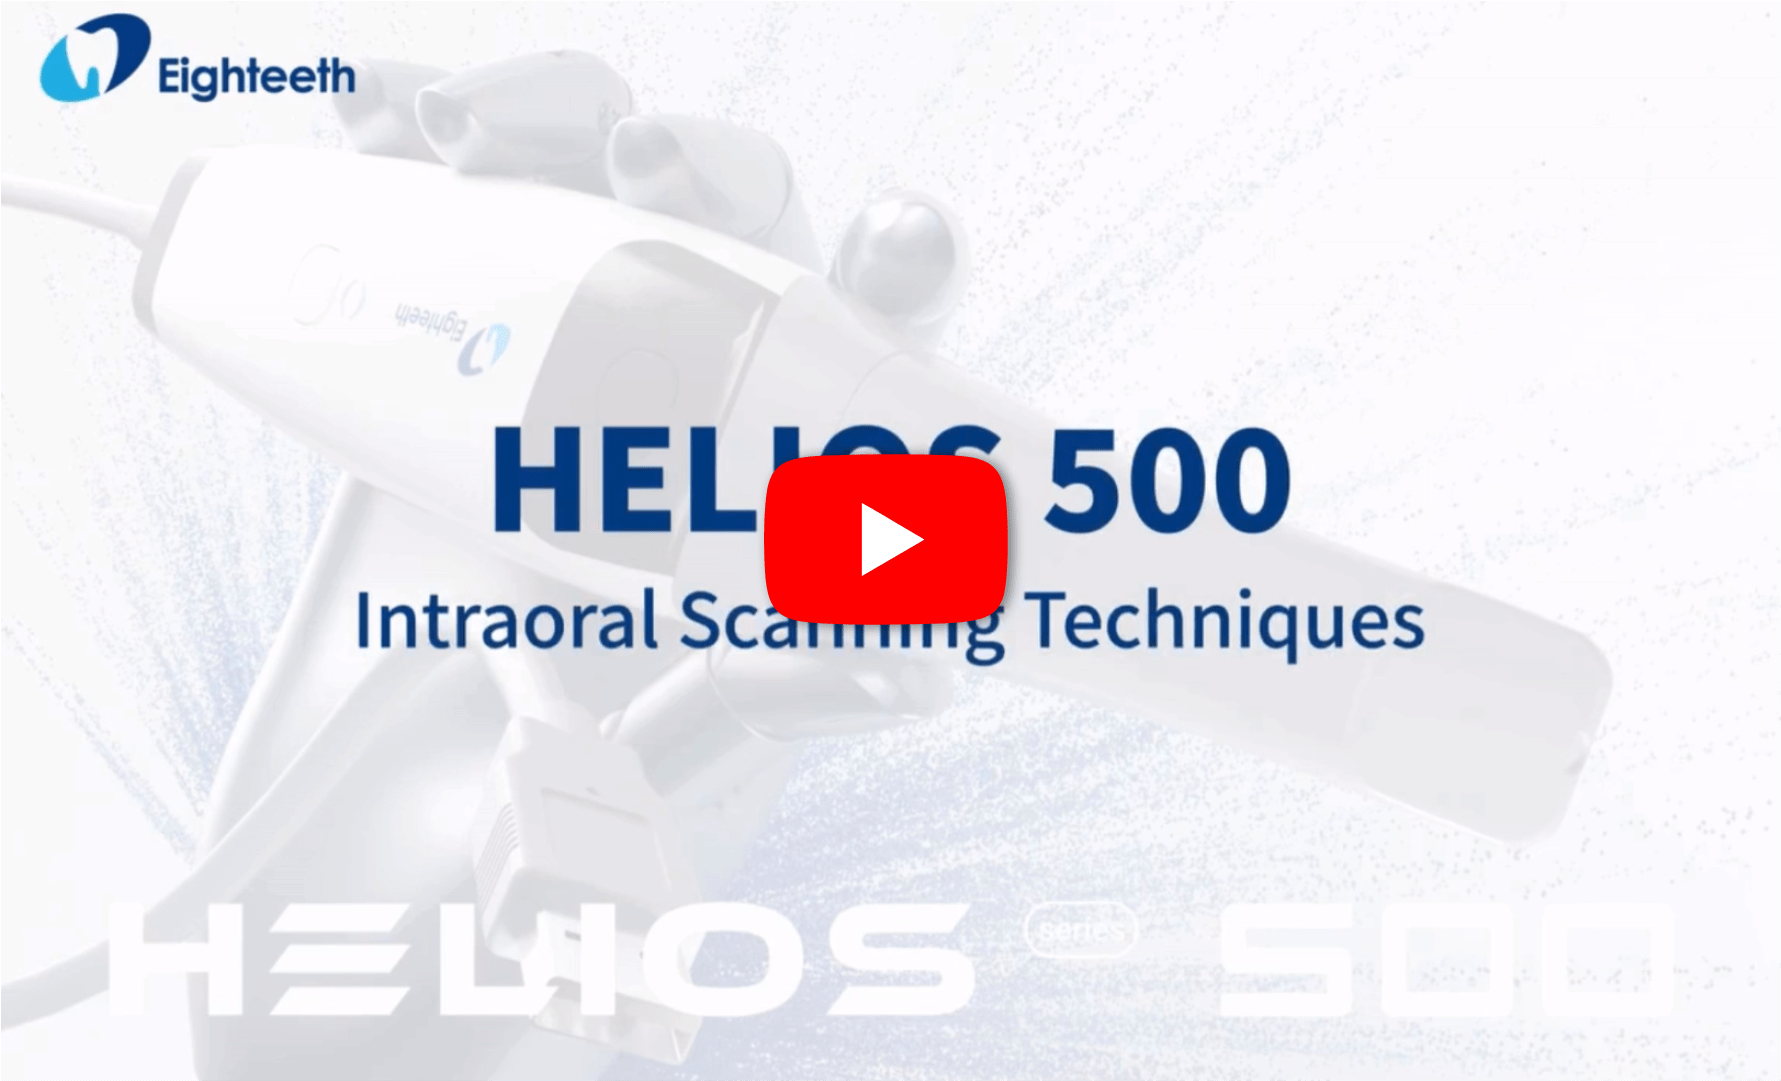 Helios 500 Intraoral Scanning Techniques